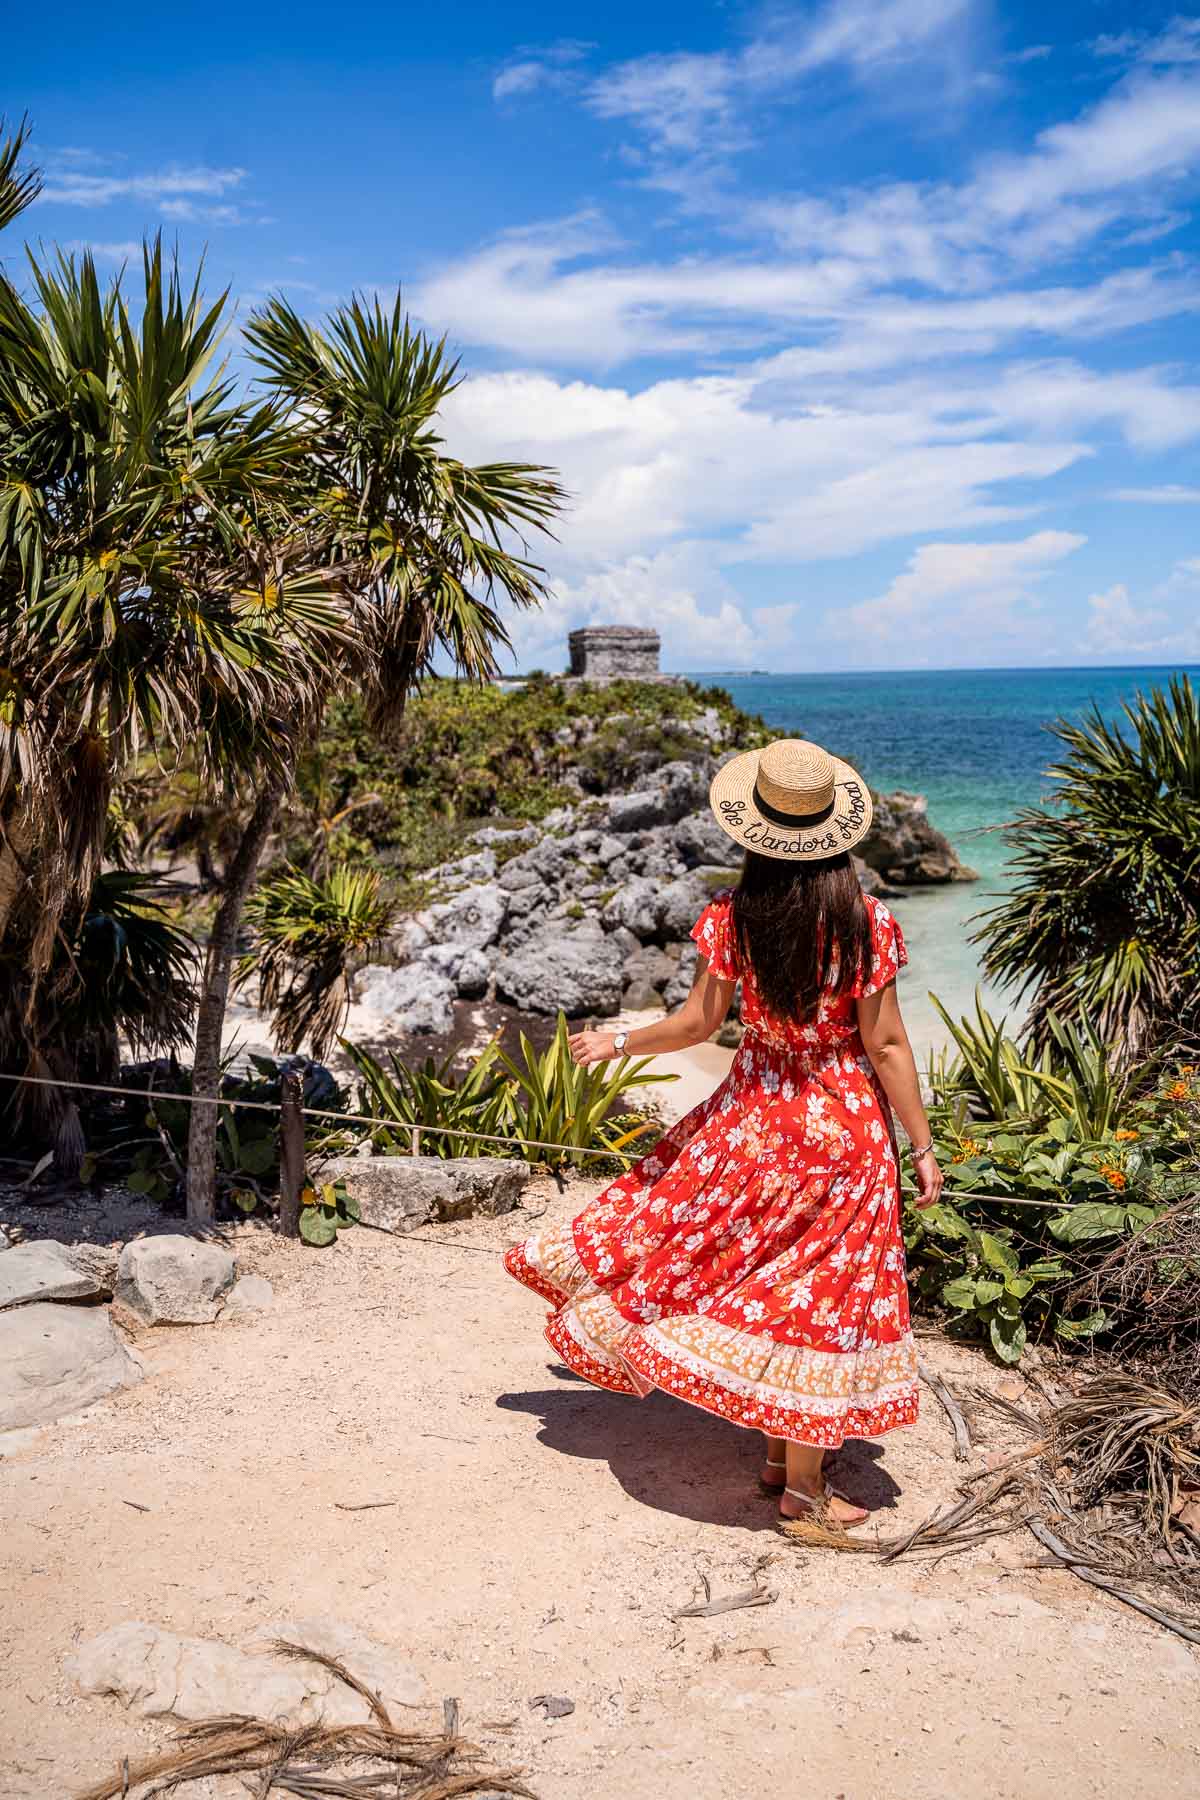 Girl in a red dress at Tulum ruins